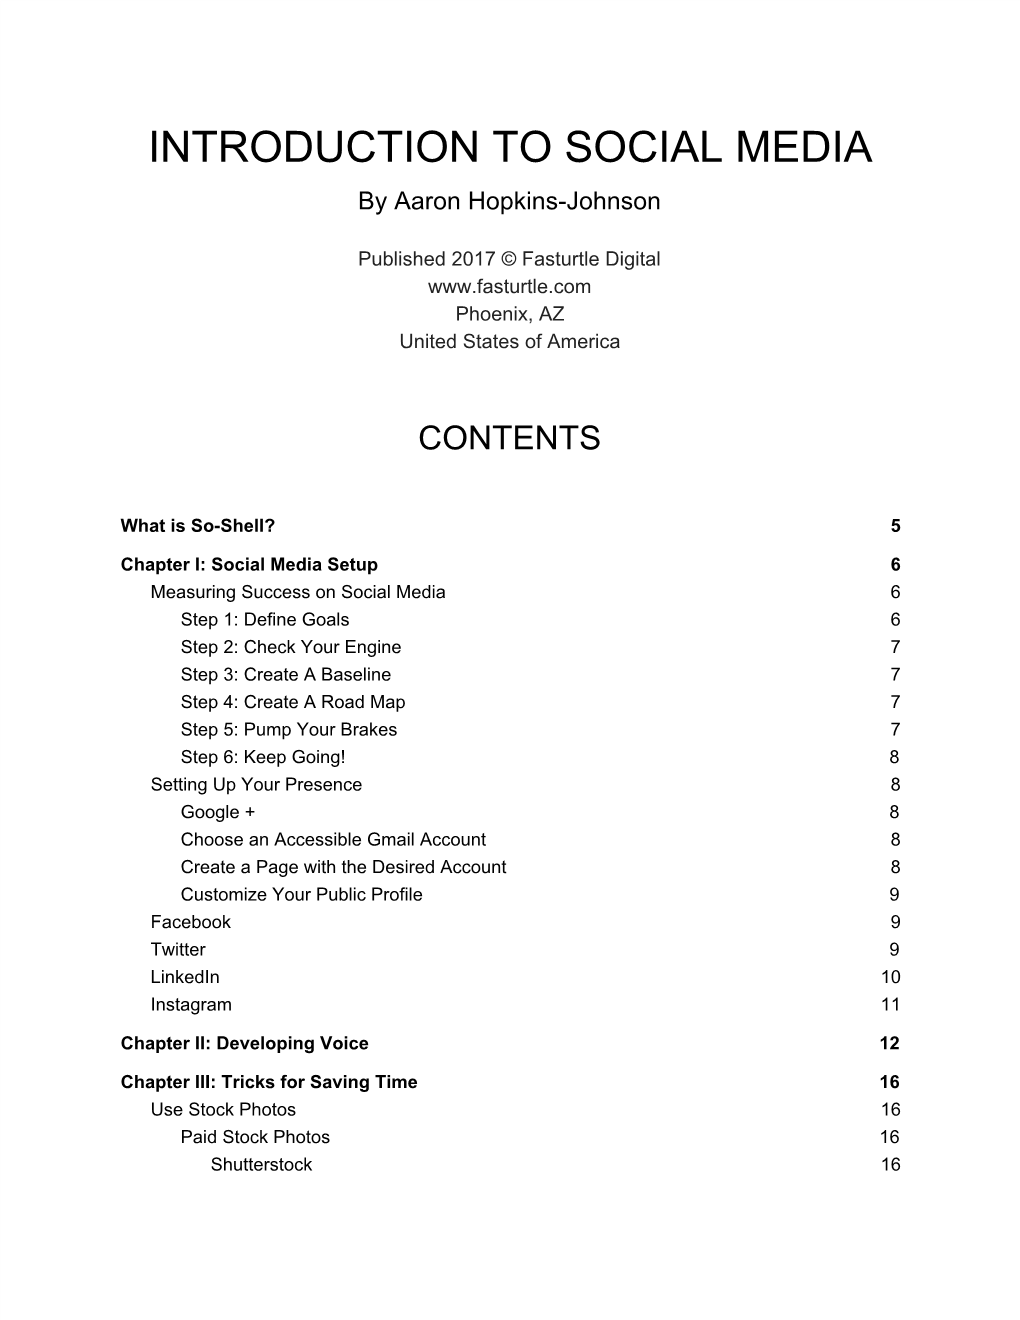 INTRODUCTION to SOCIAL MEDIA by Aaron Hopkins-Johnson